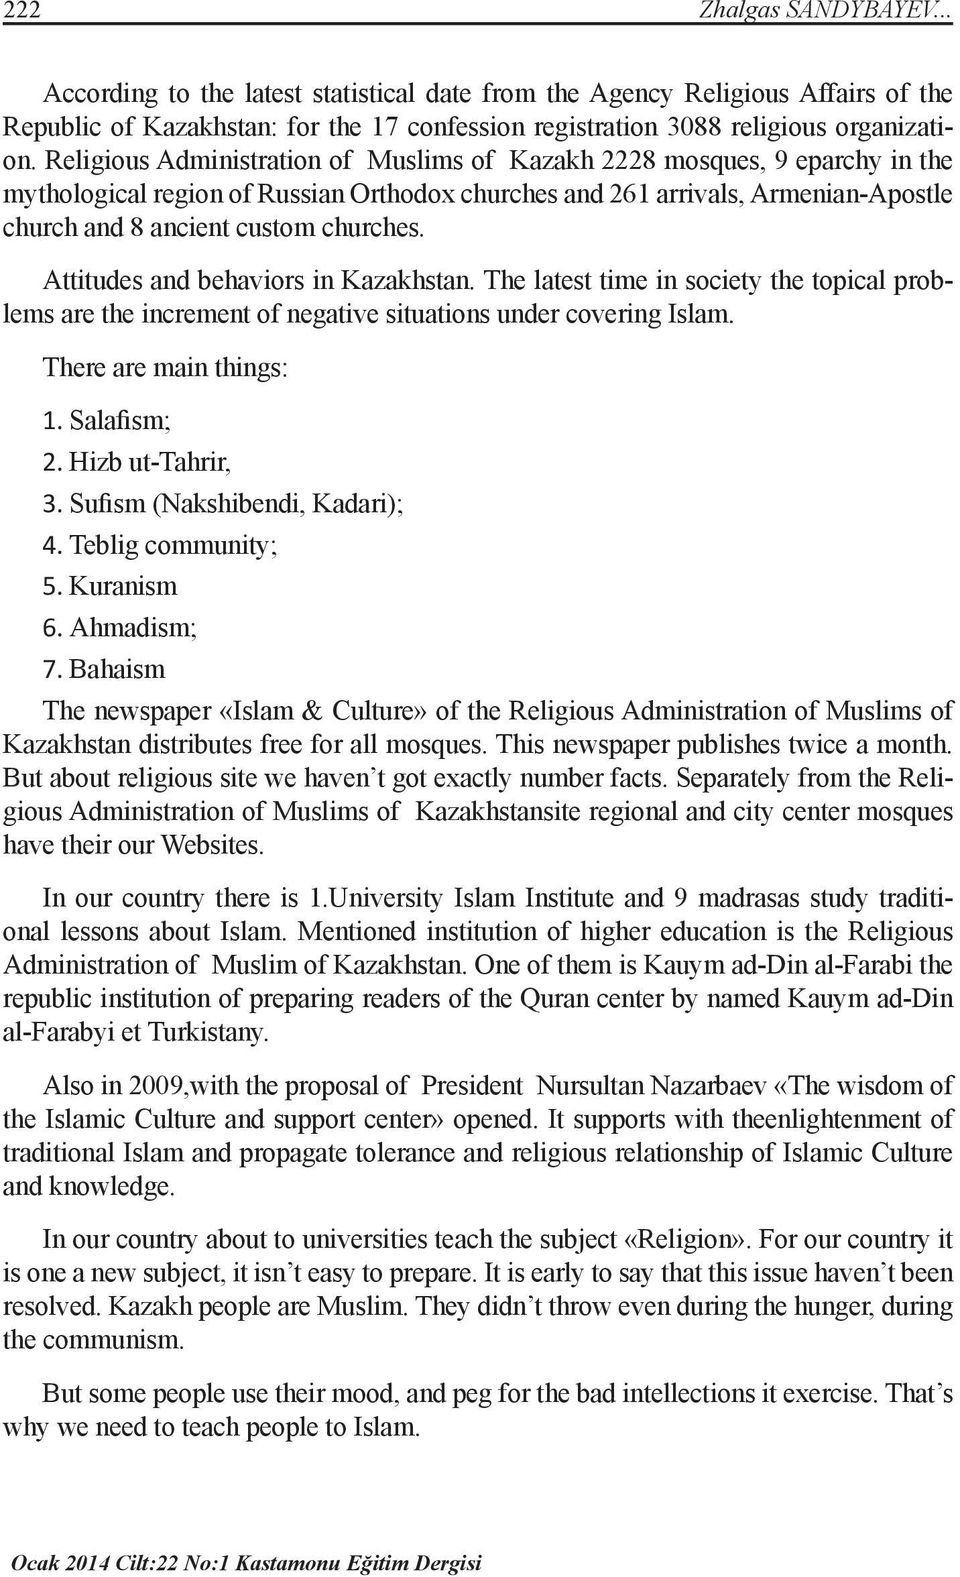 Attitudes and behaviors in Kazakhstan. The latest time in society the topical problems are the increment of negative situations under covering Islam. There are main things: 1. Salafism; 2.